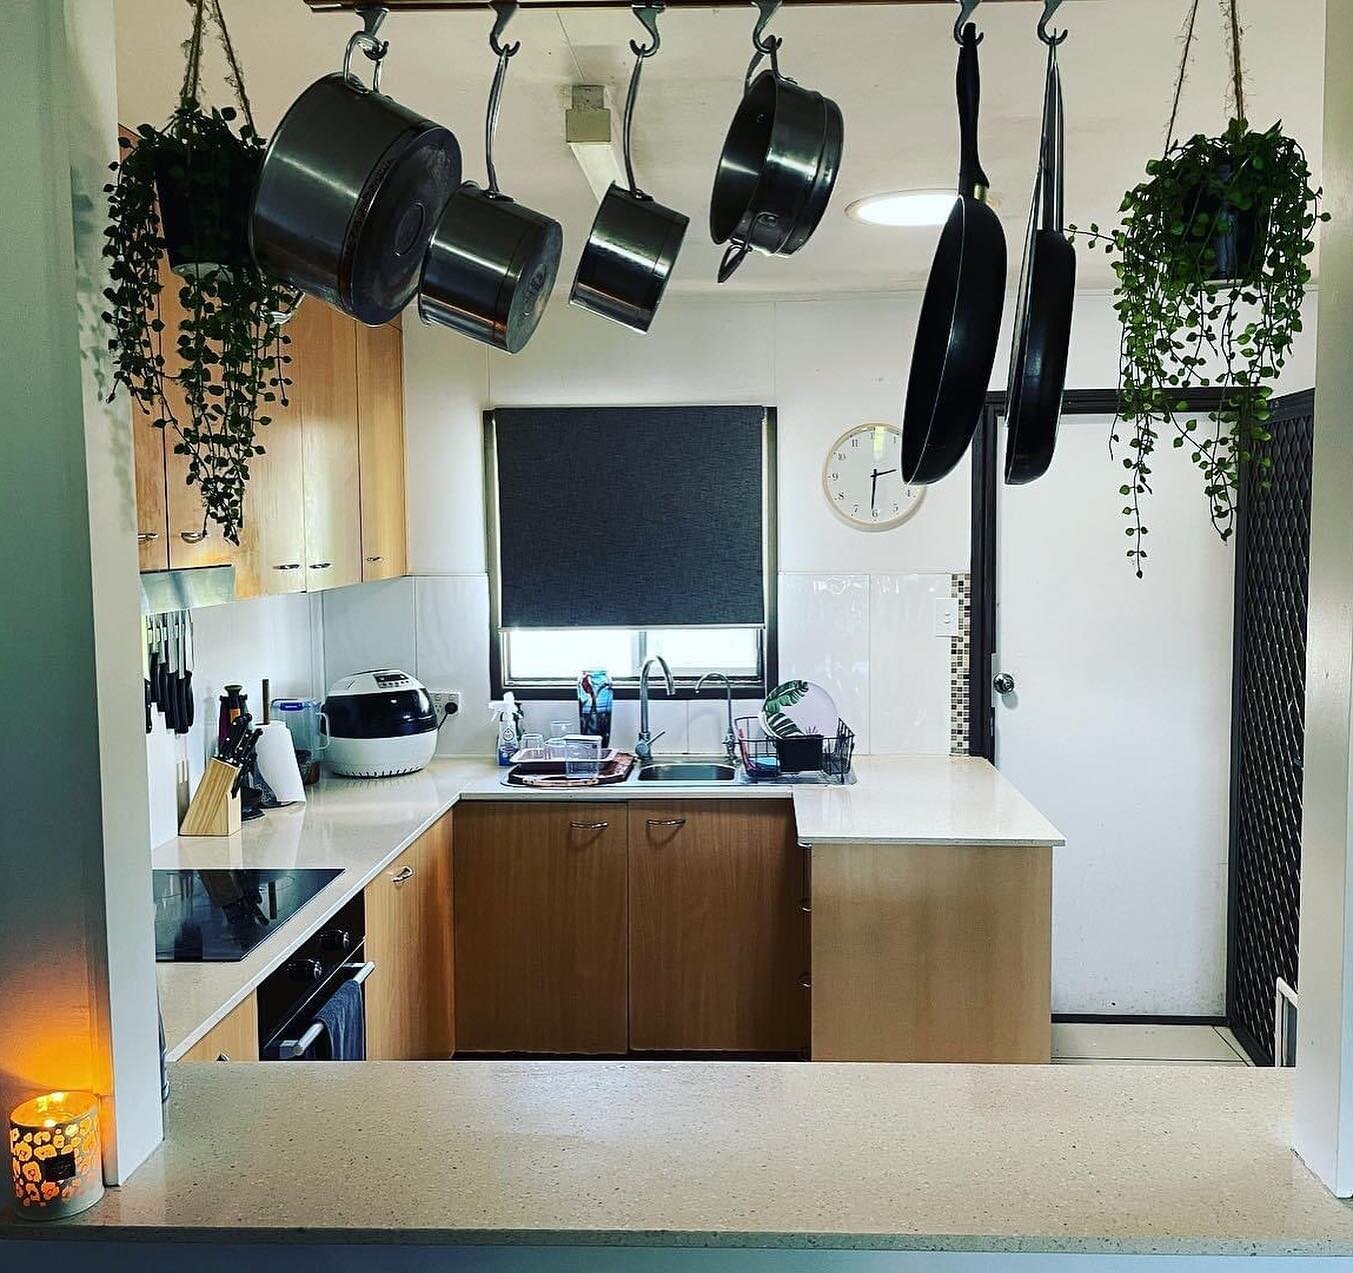 ✨ sparkling, organised and practical. Your kitchen is the heart of the home ❤️ where we pour love into the nourishment we provide for our family. 

Ready to LOVE and appreciate the kitchen space you already have? Let us transform your space for you! 